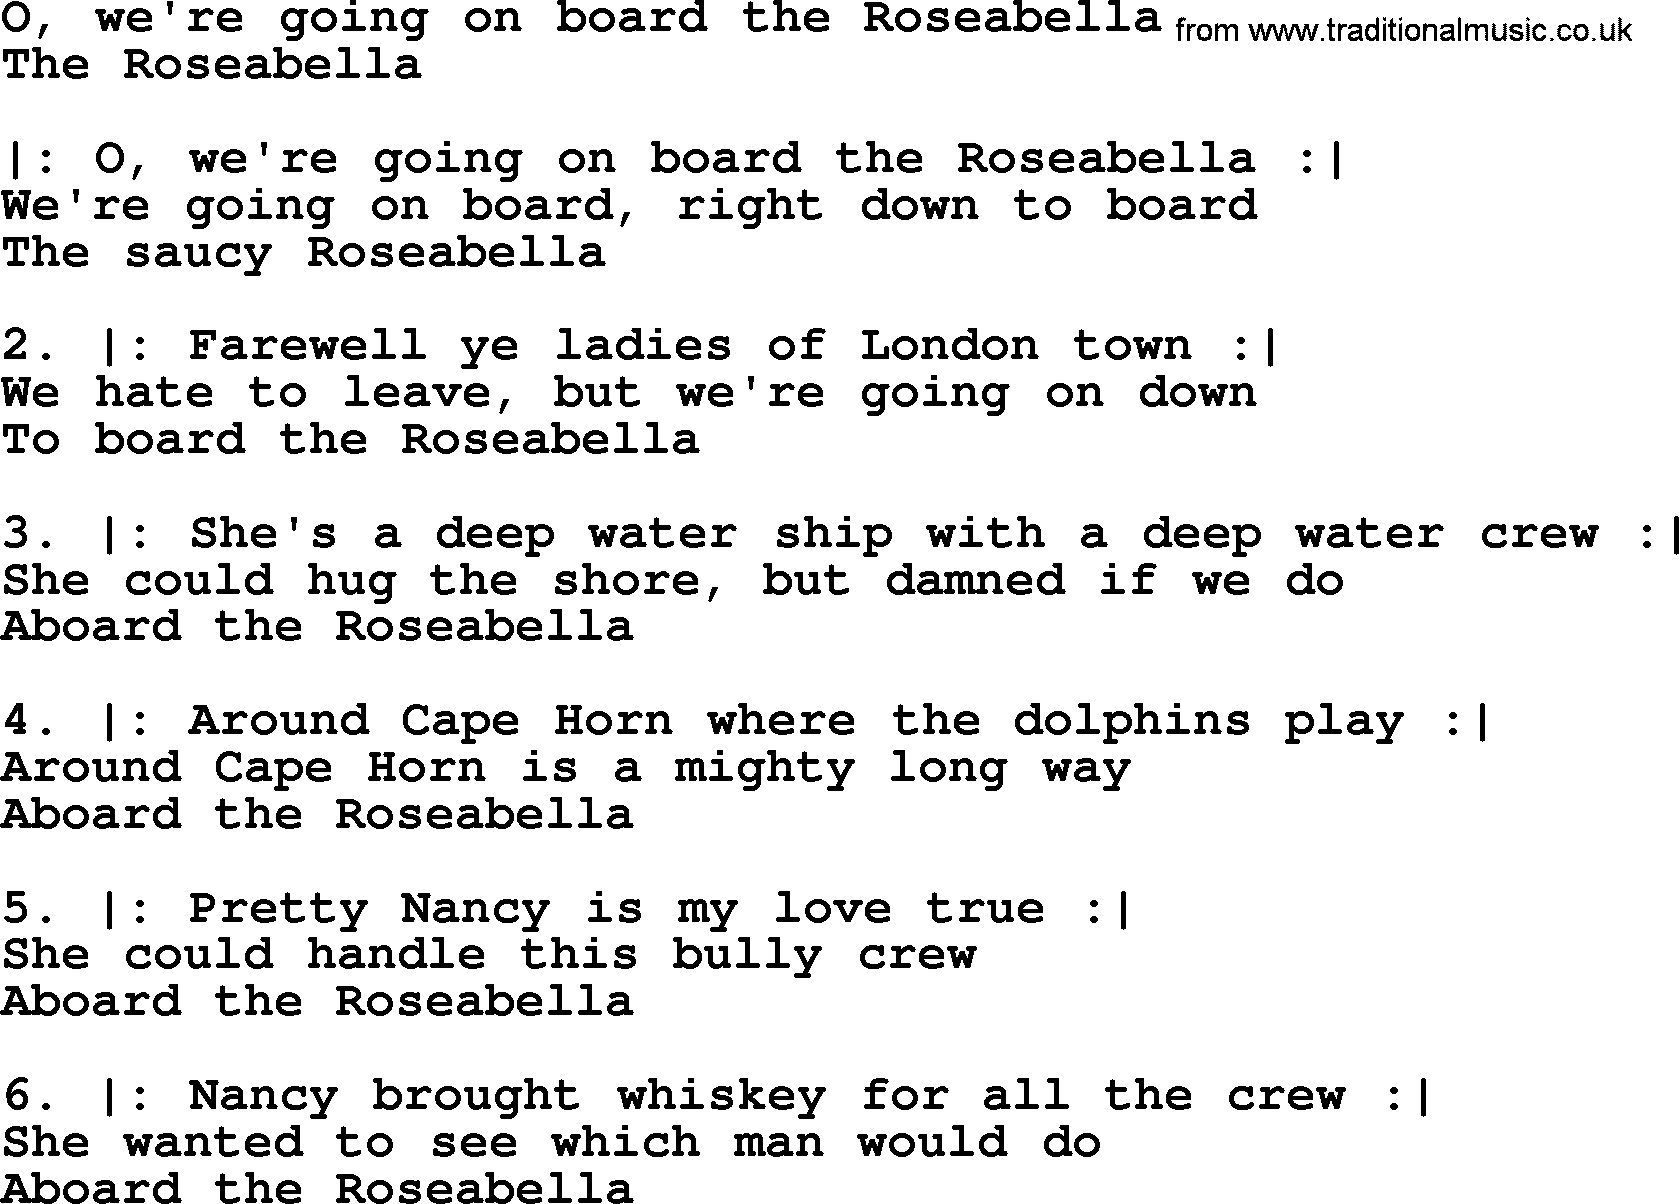 Sea Song or Shantie: O Were Going On Board The Roseabella, lyrics